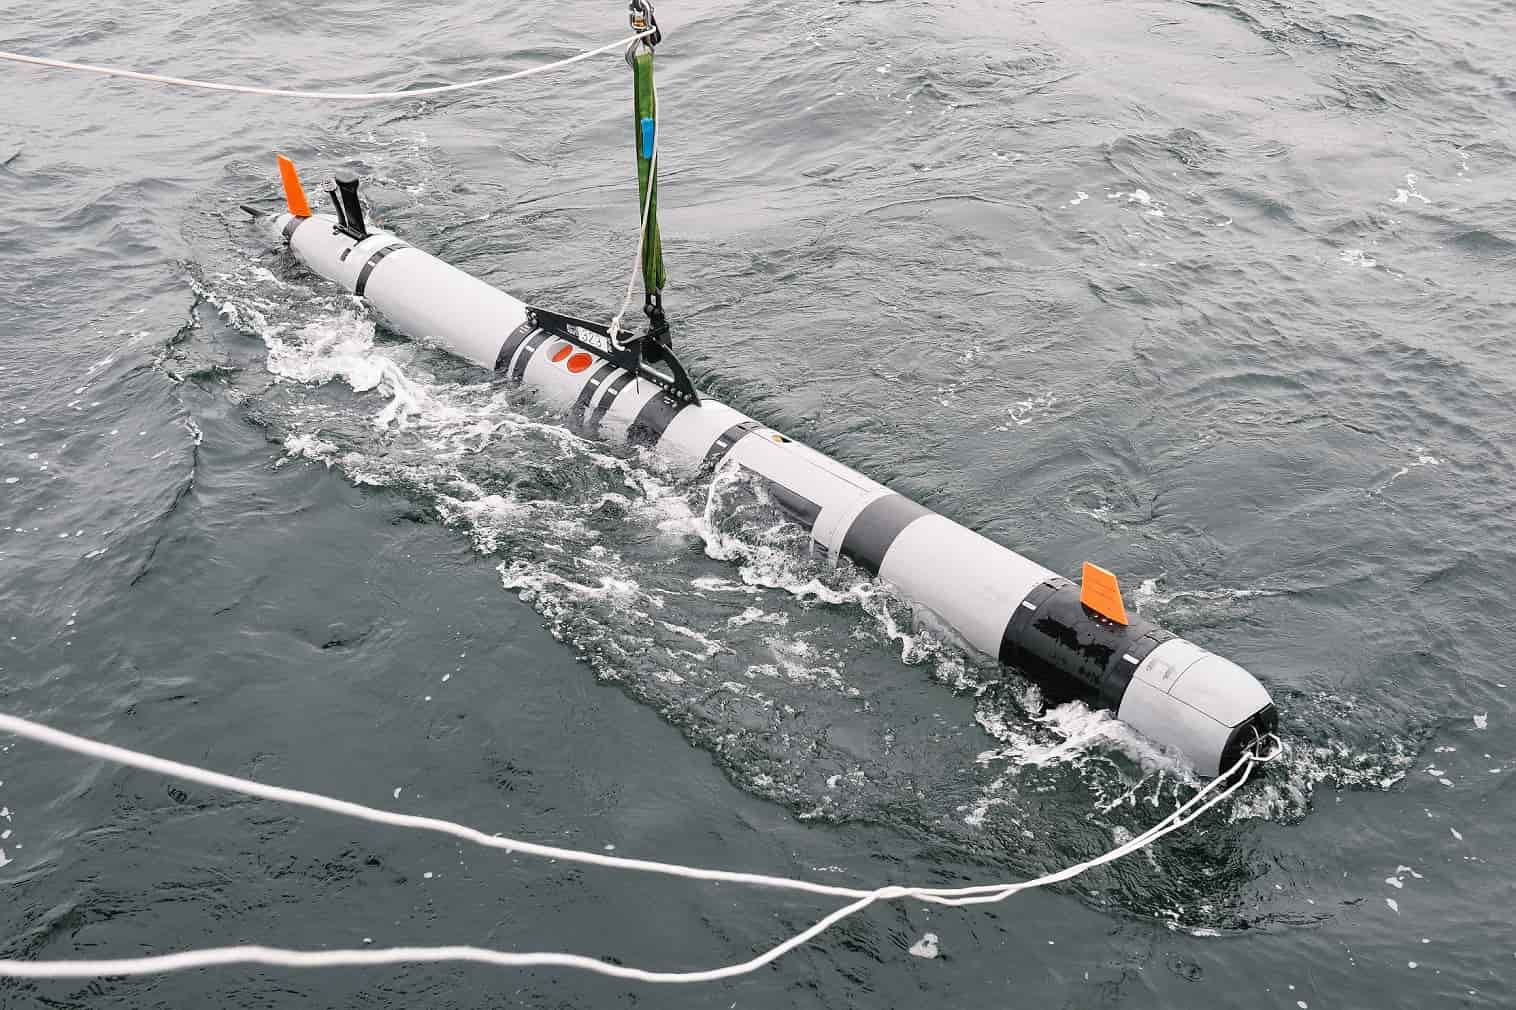 U.S. Navy tests new unmanned undersea vehicle during BALTOPS 2019